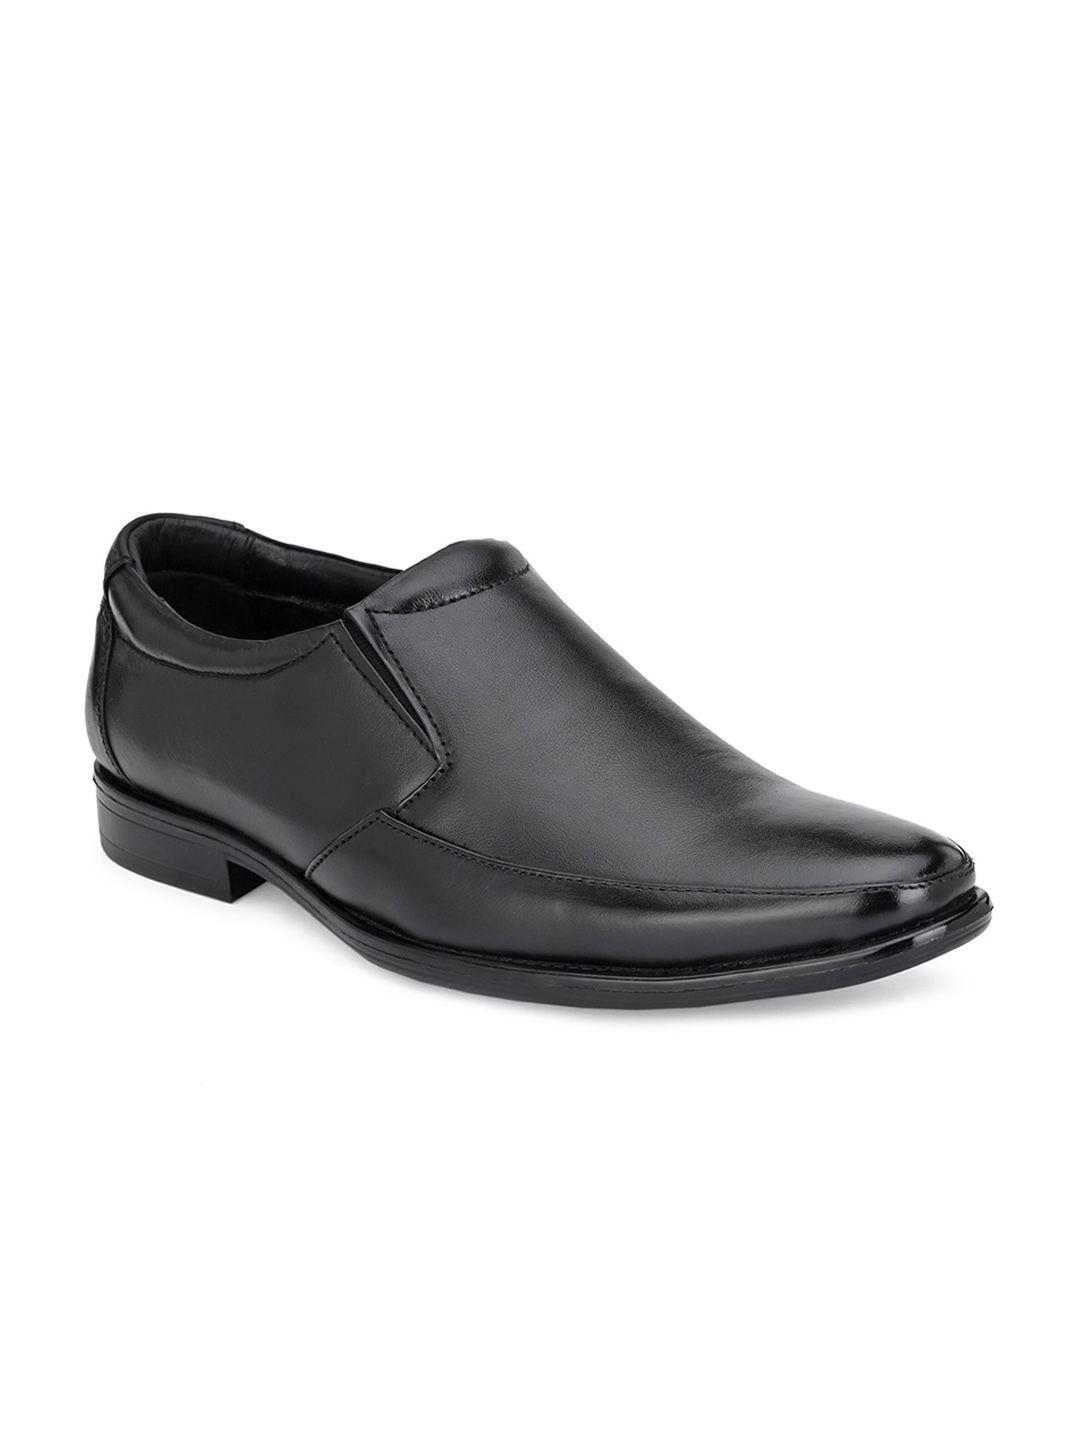 eego italy men genuine leather formal slip on shoes